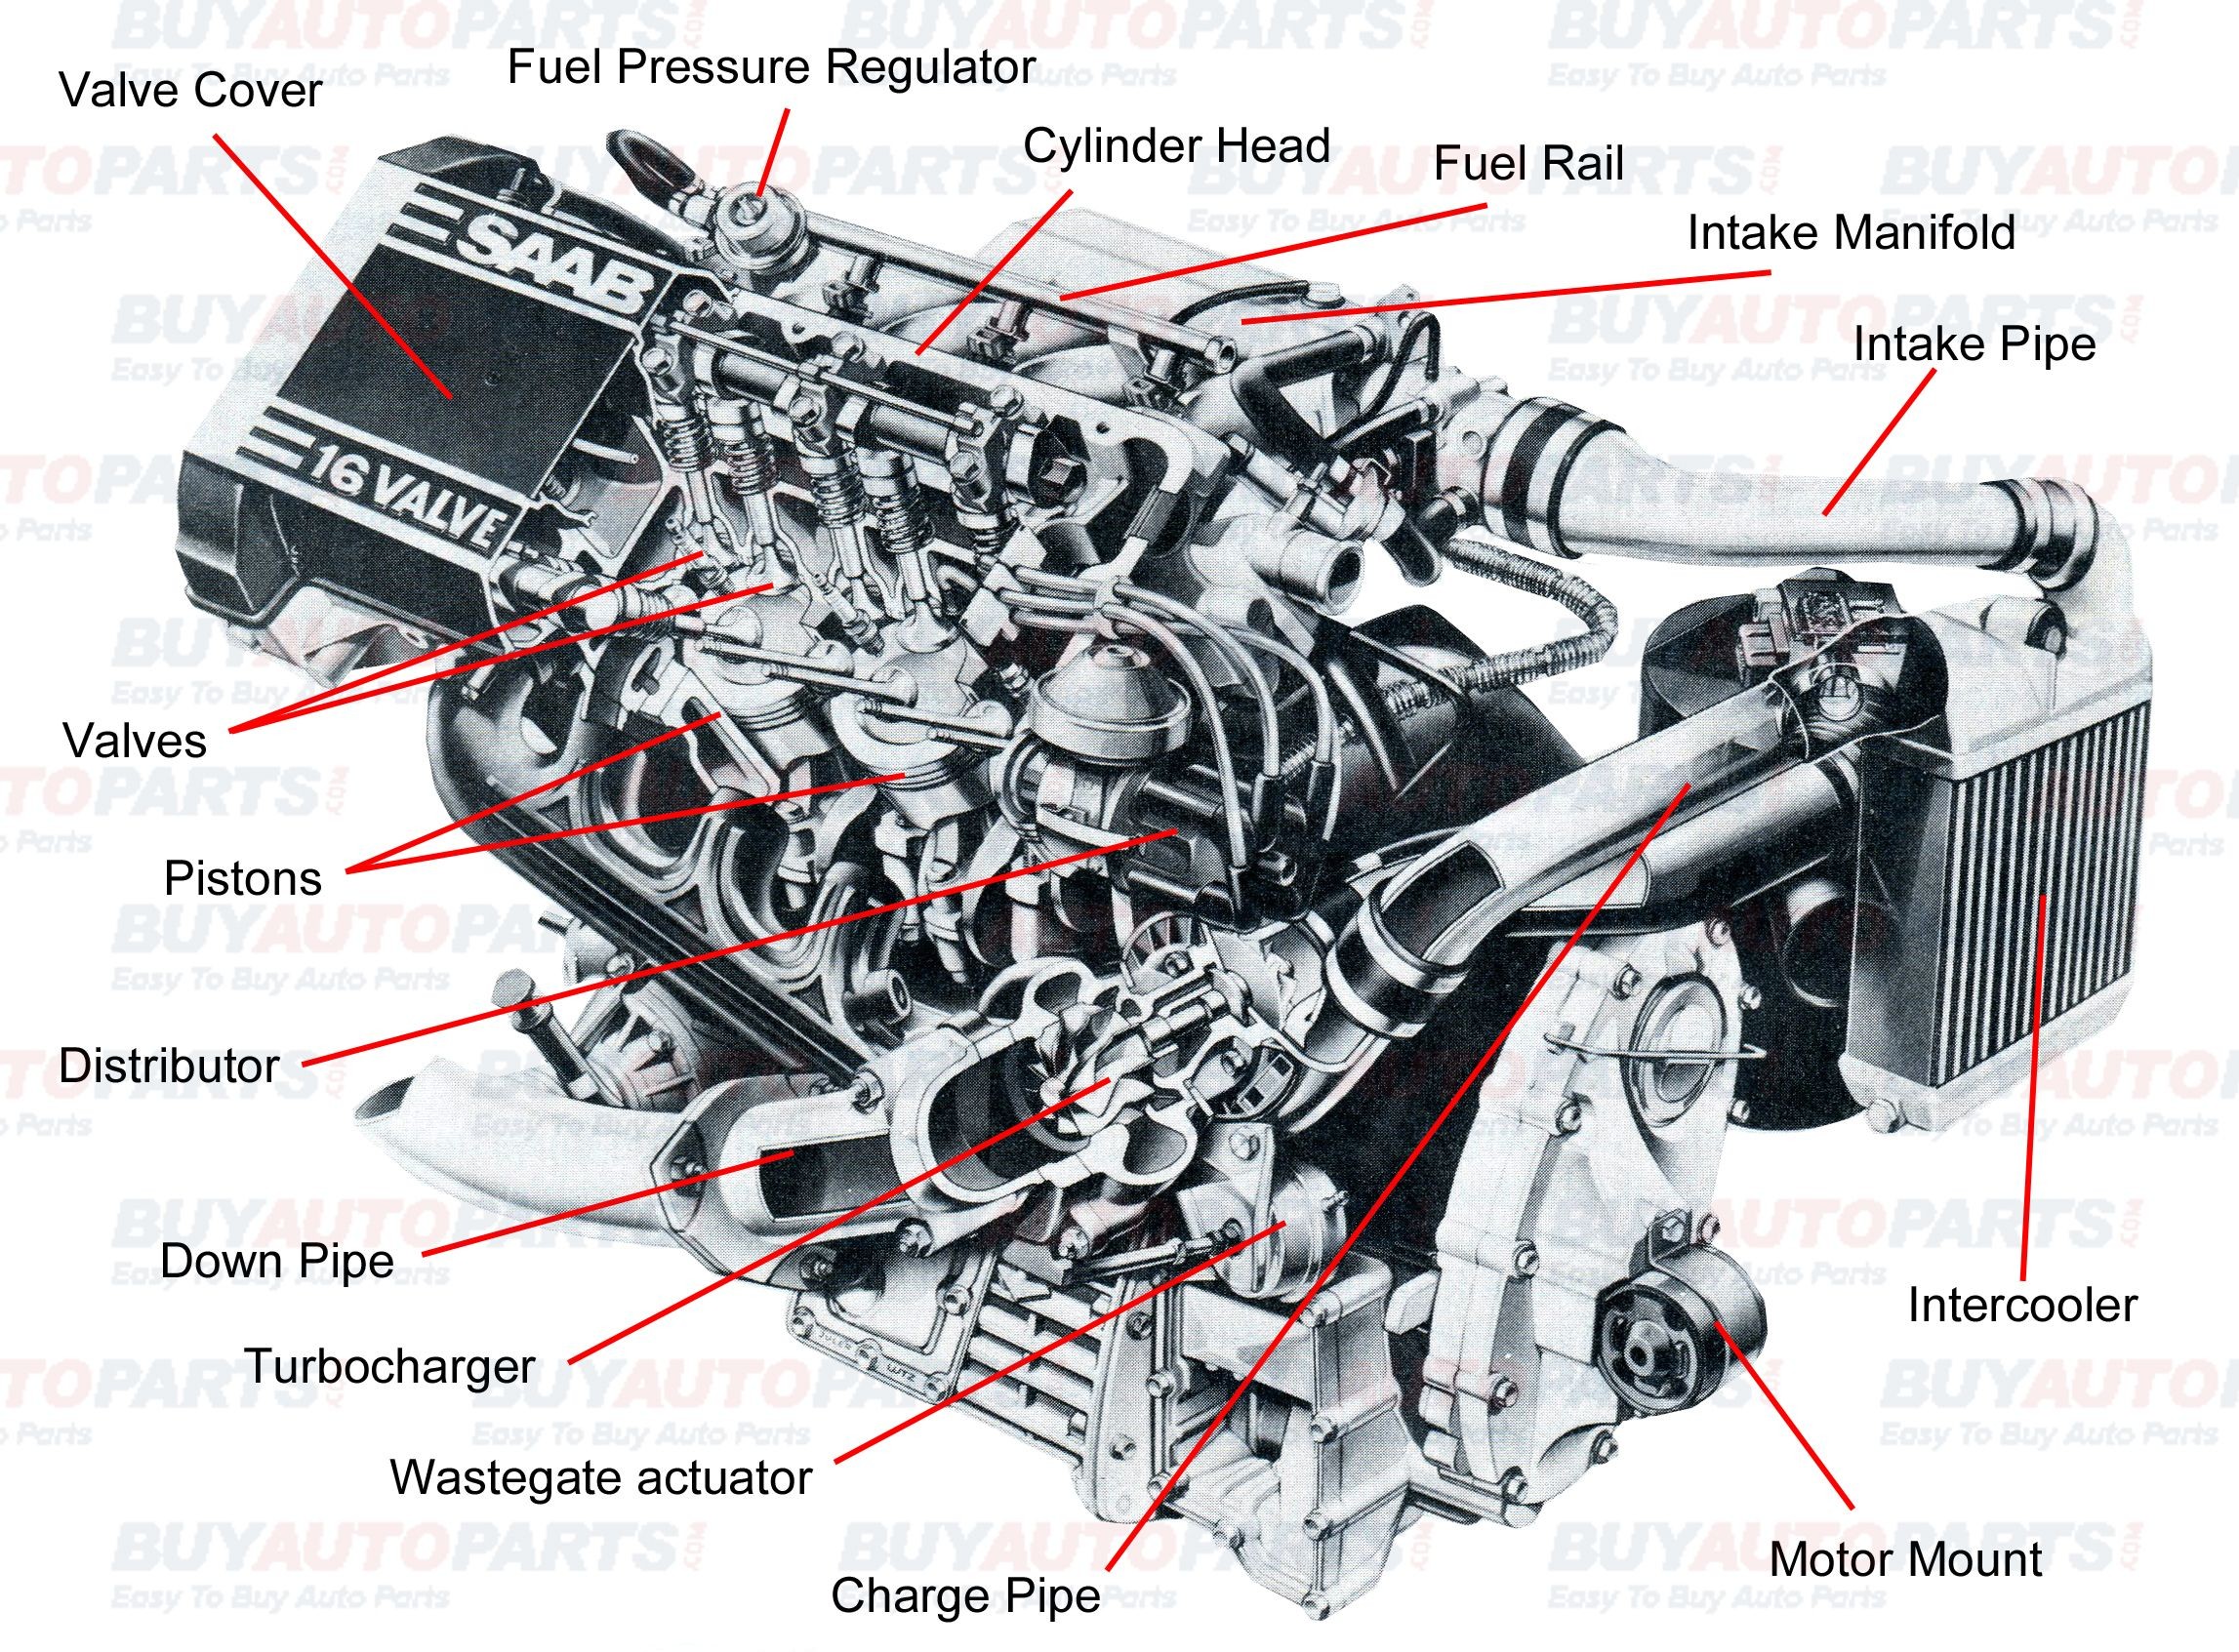 Car Exterior Parts Diagram Pin by Jimmiejanet Testellamwfz On What Does An Engine with Turbo Of Car Exterior Parts Diagram